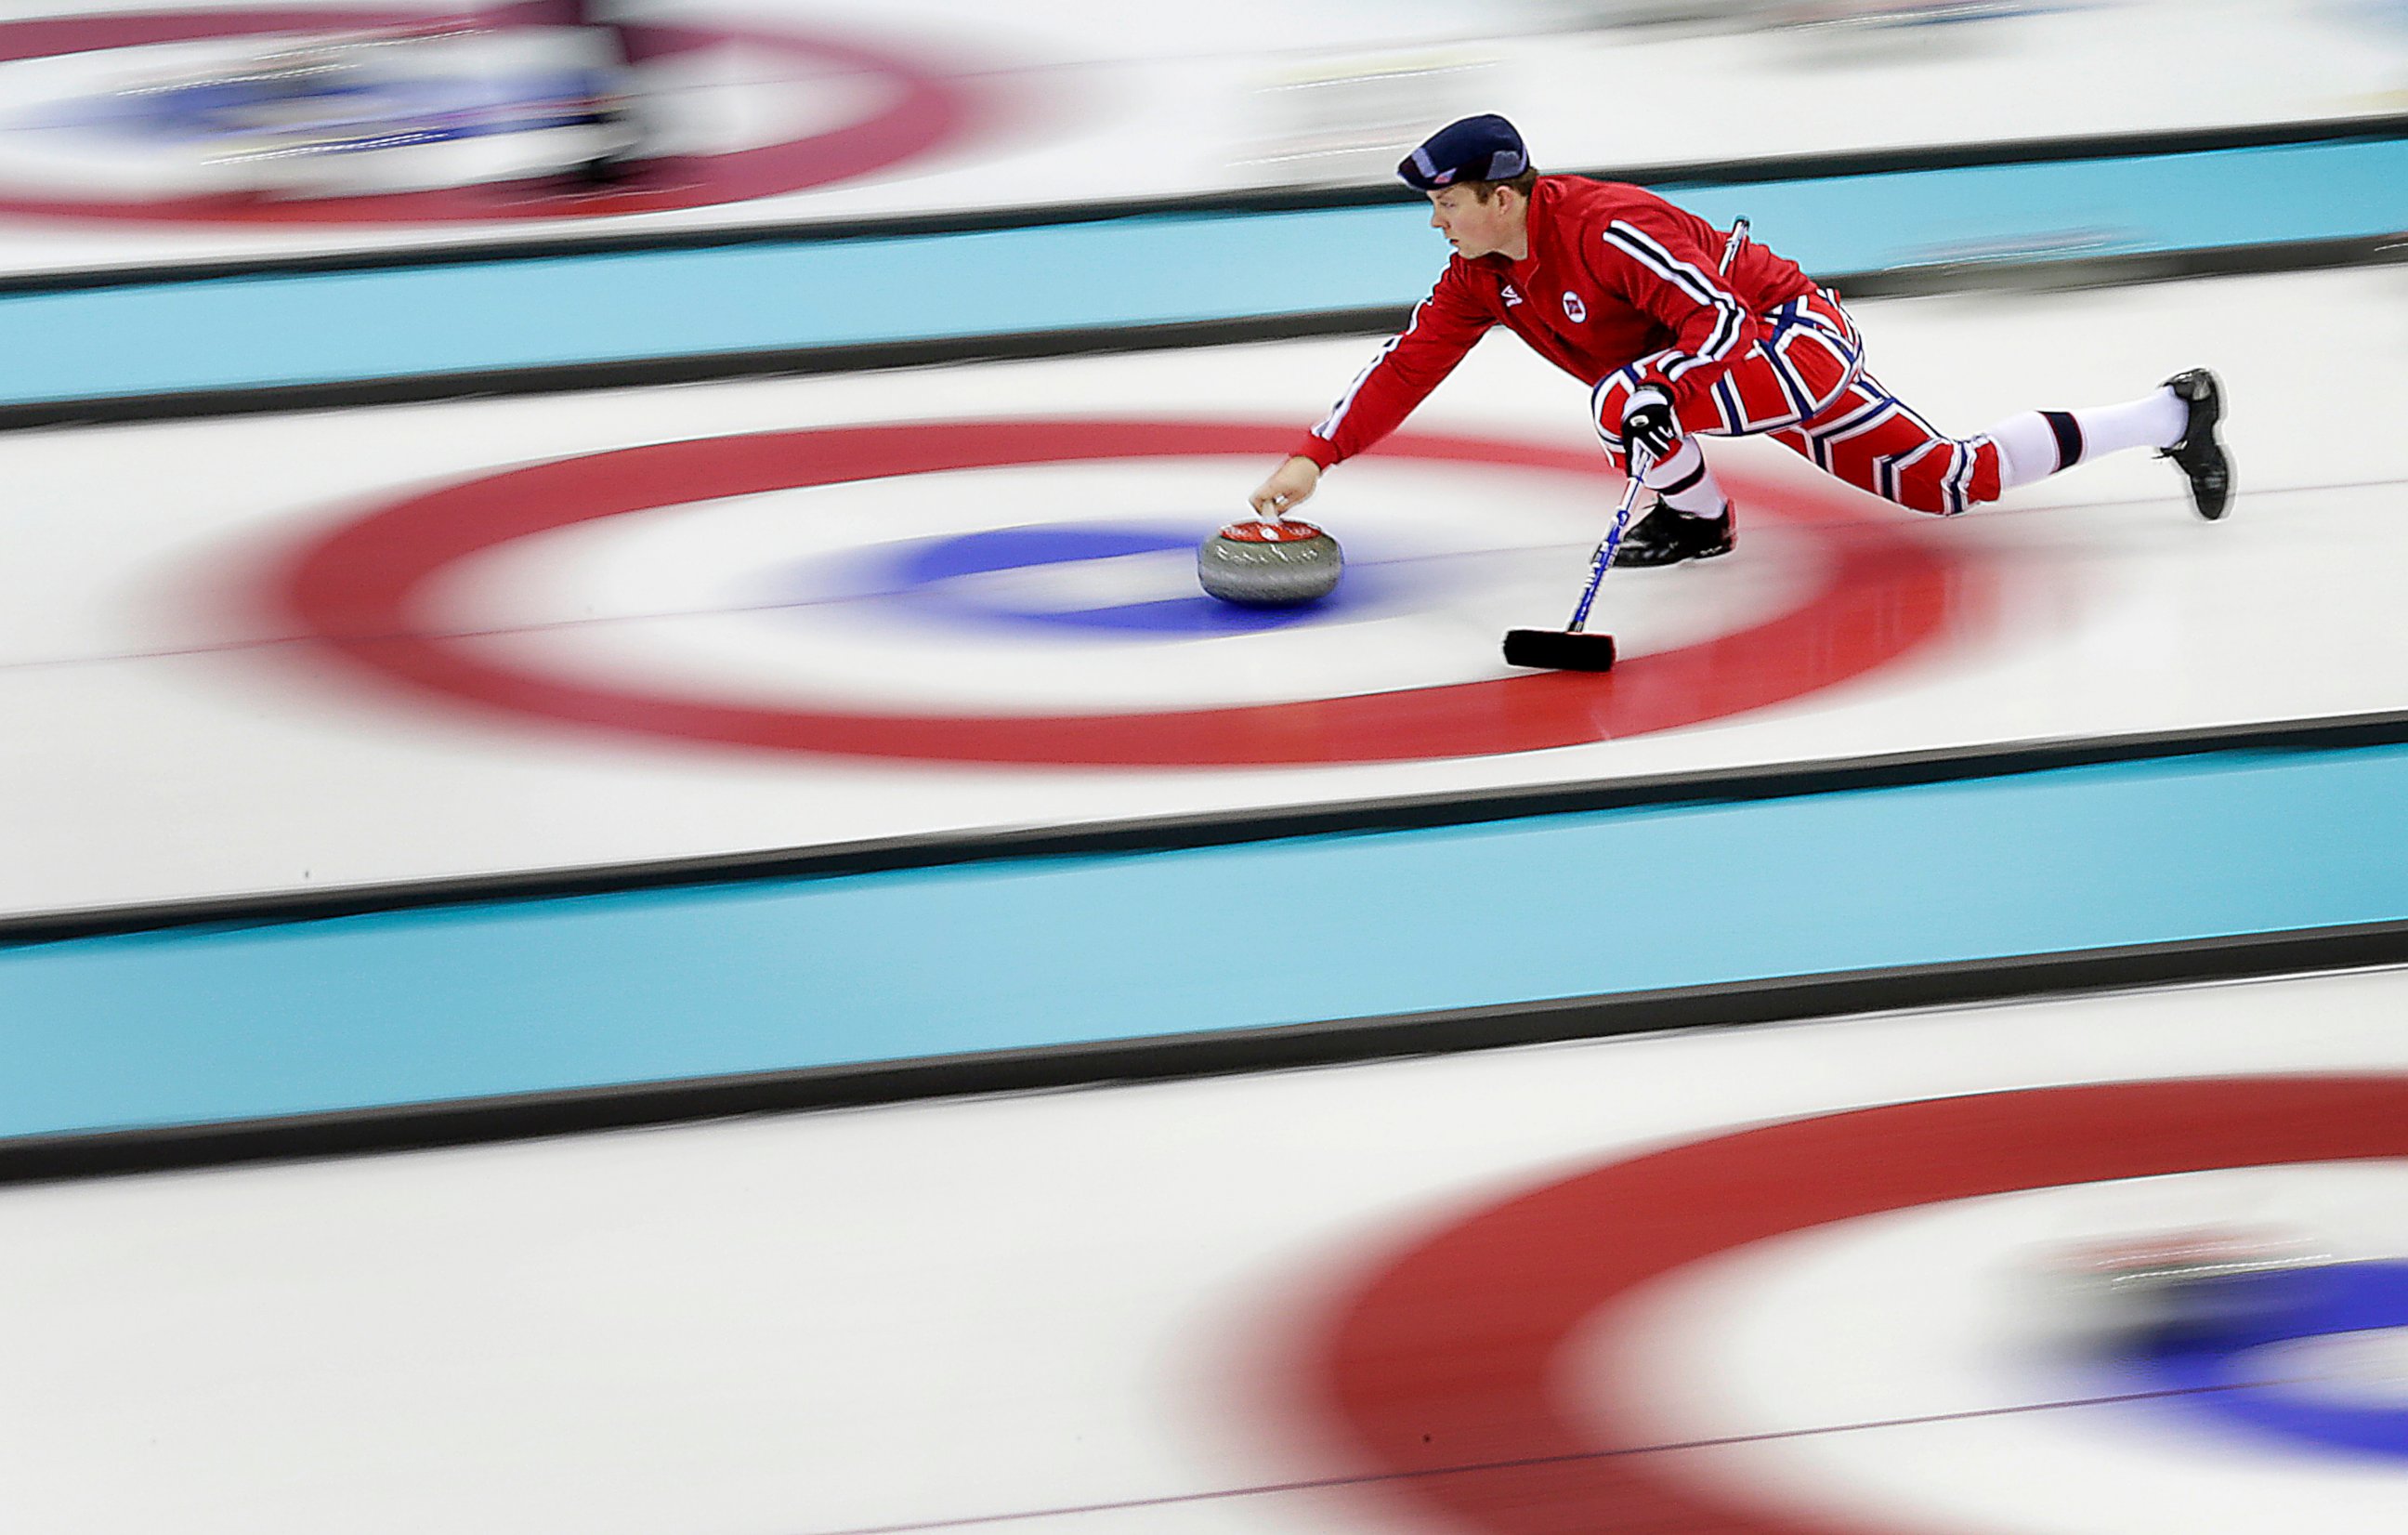 PHOTO: Norway's Christoffer Svae delivers the stone during the men's curling training session at the 2014 Winter Olympics, Feb. 9, 2014, in Sochi, Russia.